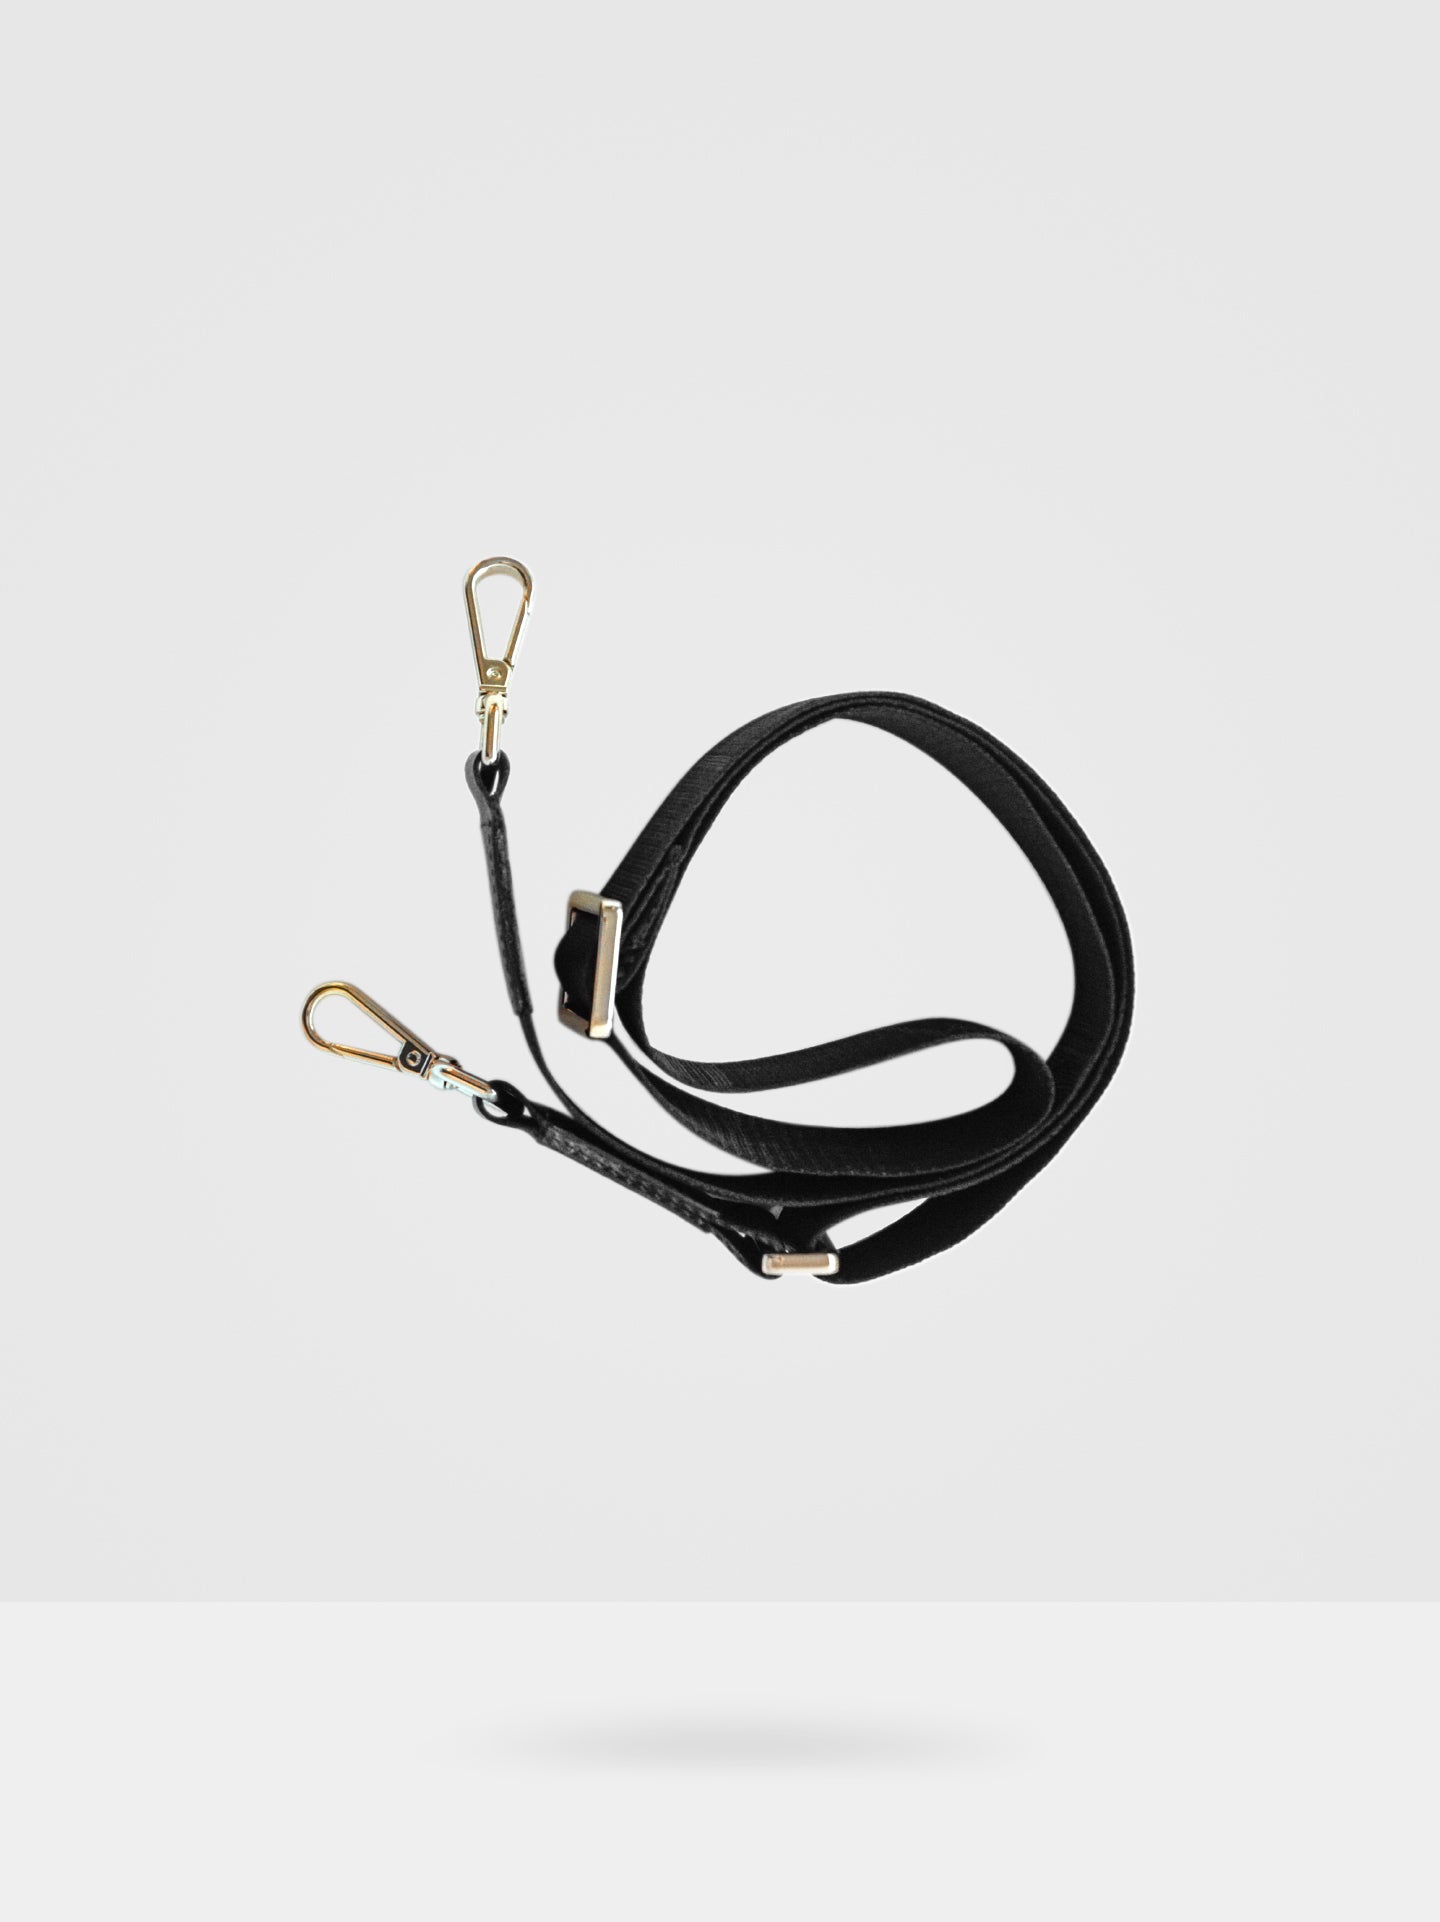 Thick Crossbody Bag Strap, Black and Gold